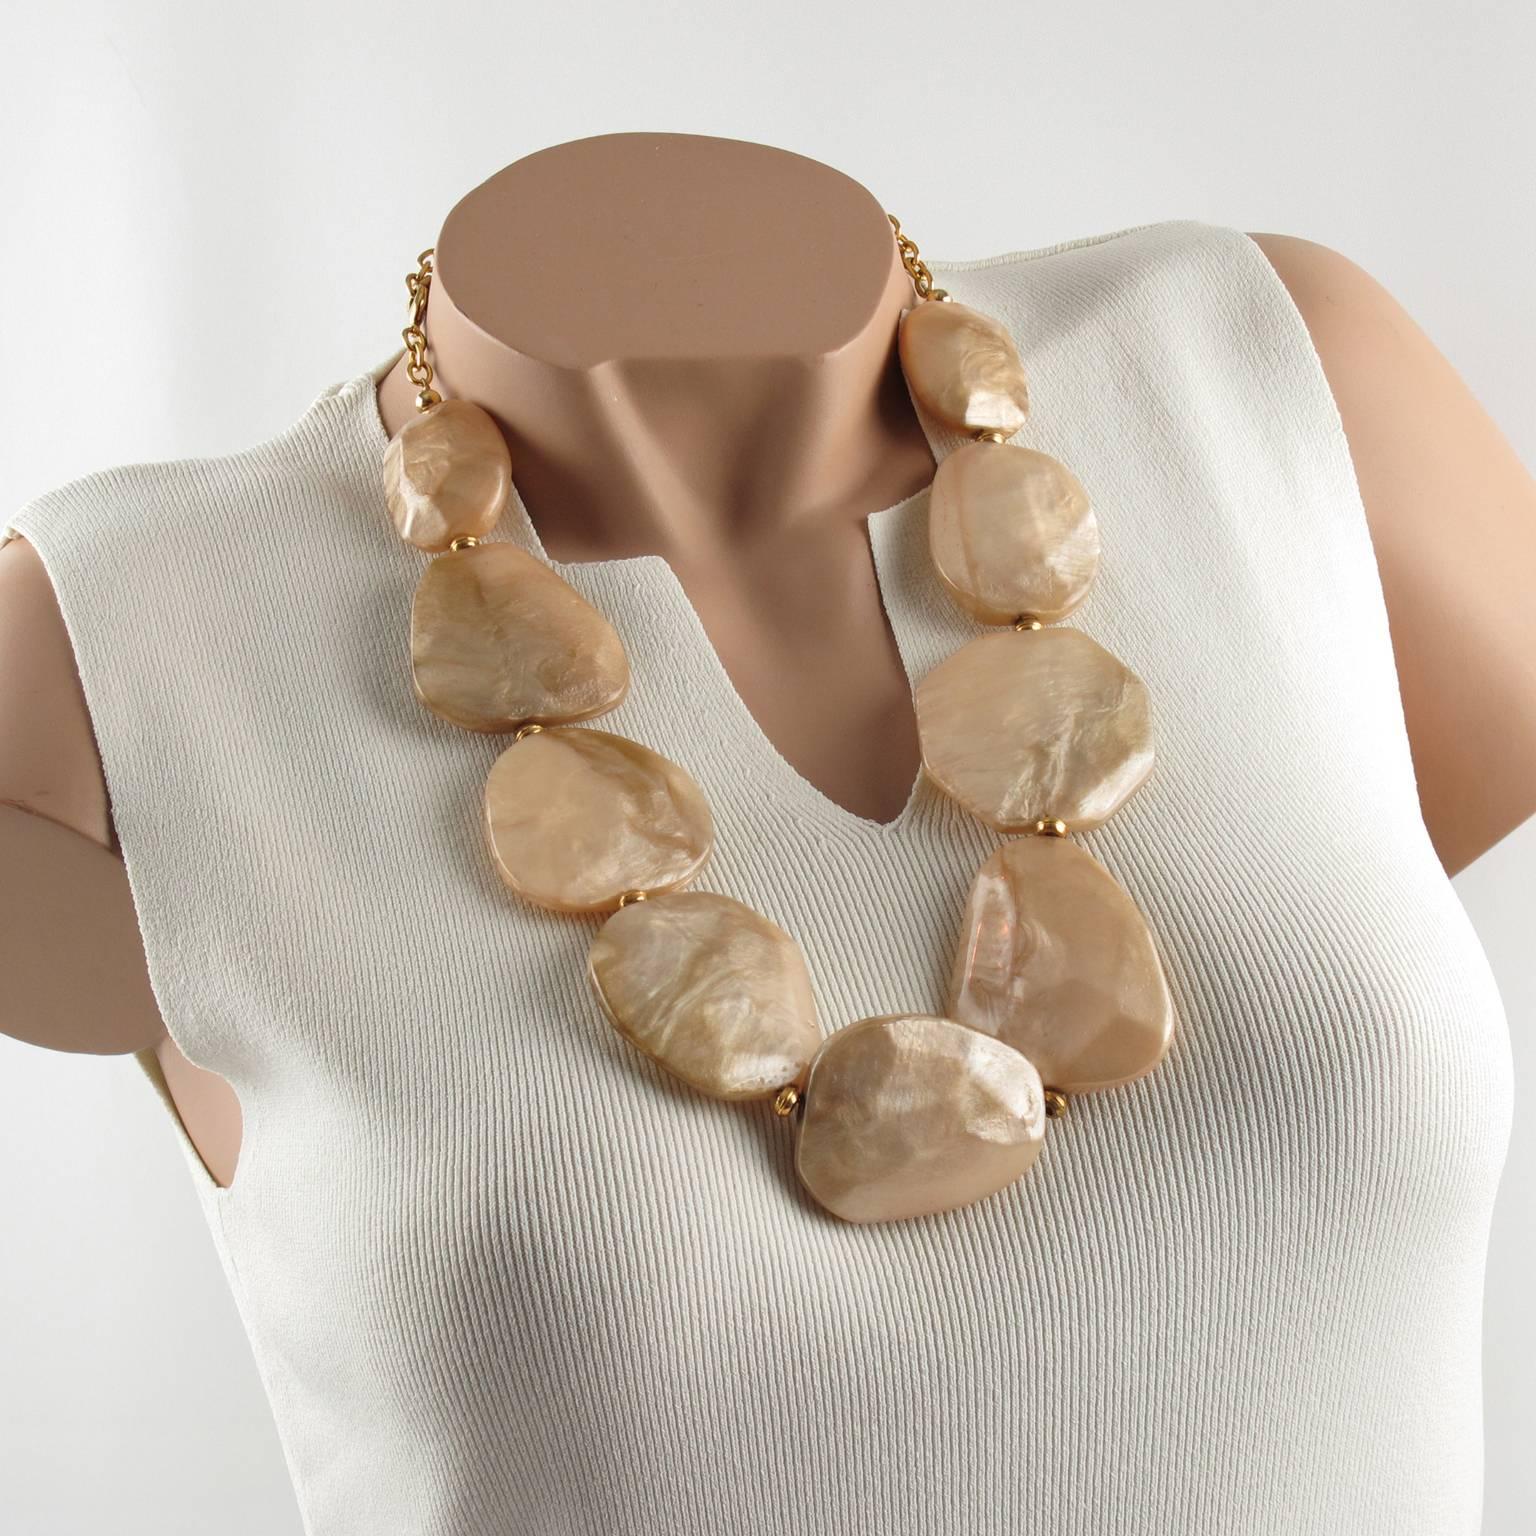 Impressive Dominique Denaive Paris signed Necklace. Sculptural huge choker necklace build with textured resin pebble shaped elements in lovely light peach color with moon-glow textured pattern. Gilt metal chain for length flexibility. Signed on